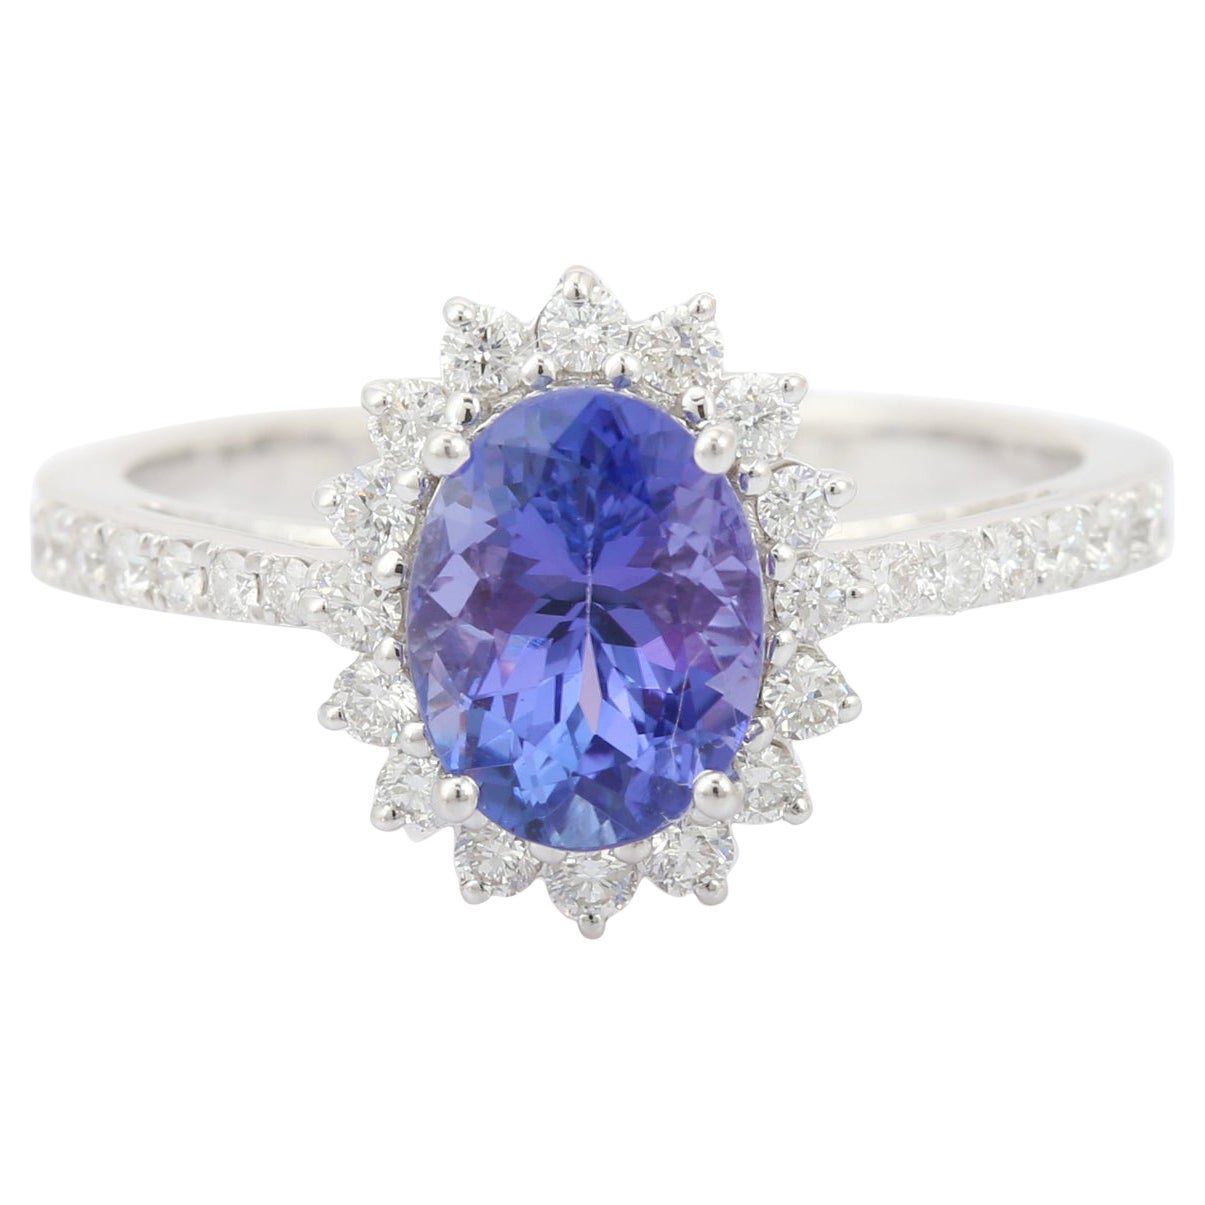 For Sale:  1.59 Carat Natural Tanzanite and Diamond Ring in 18k Solid White Gold